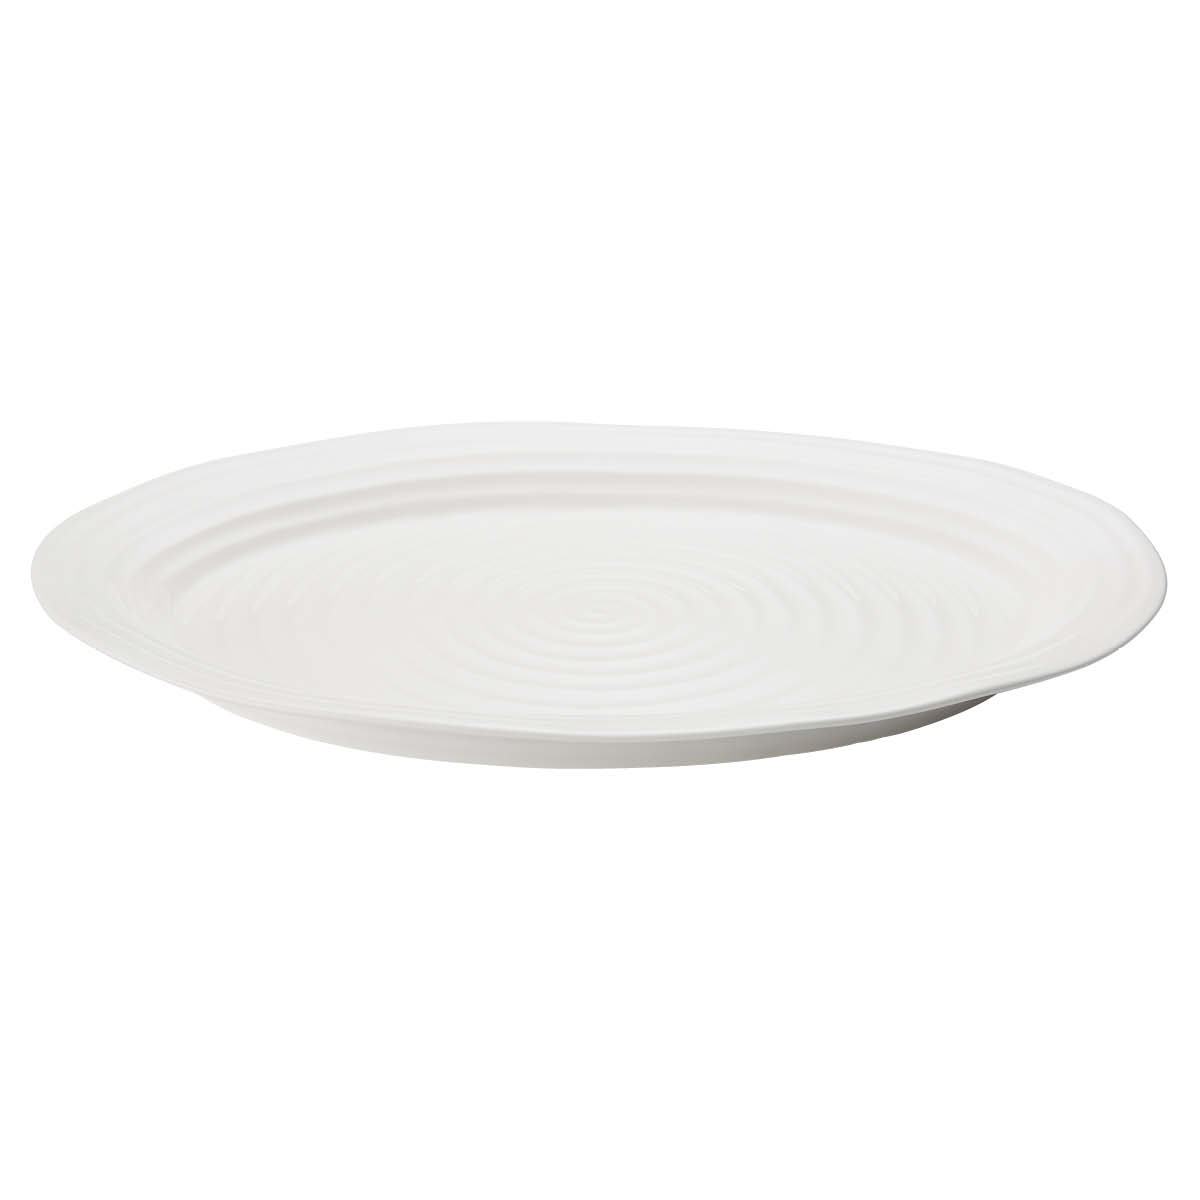 Sophie Conran White Oval Turkey Platter image number null